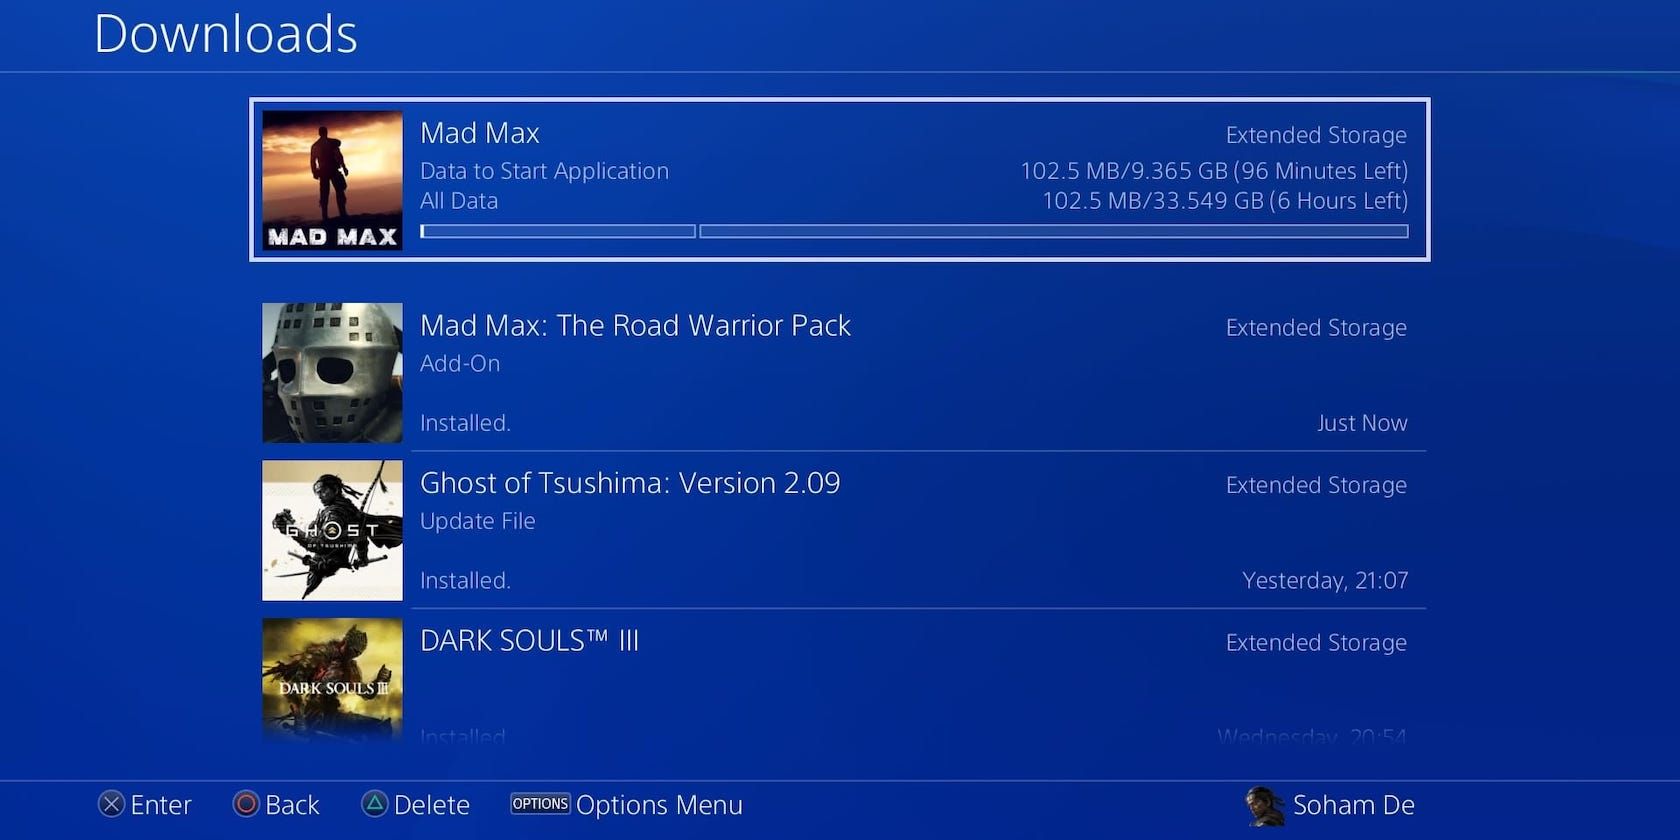 The Downloads section of the PS4 downloading Mad Max